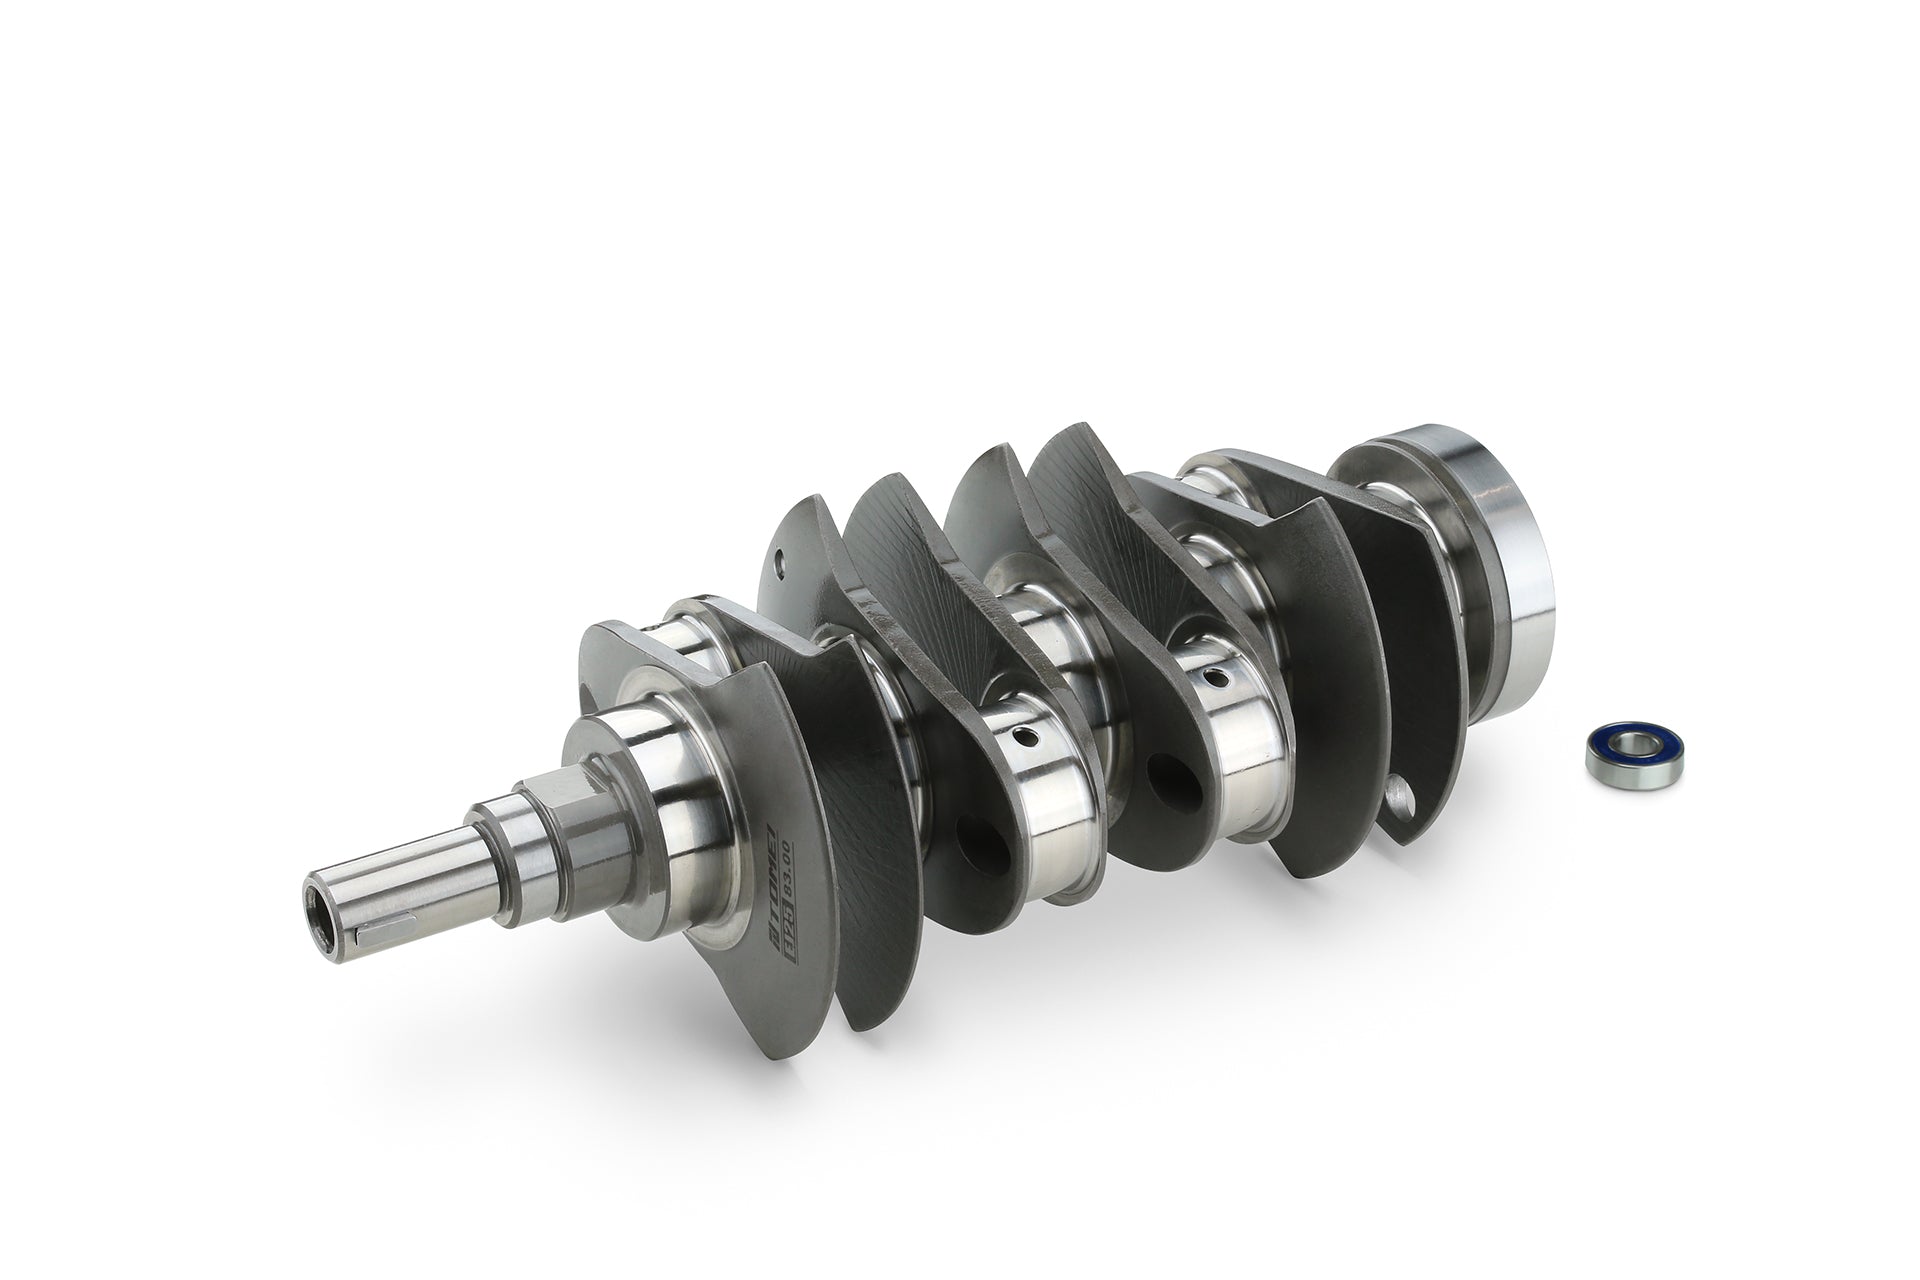 TOMEI FORGED BILLET FULL COUNTERWEIGHT CRANKSHAFT EJ25 2.6 83.0mm (Previous Part